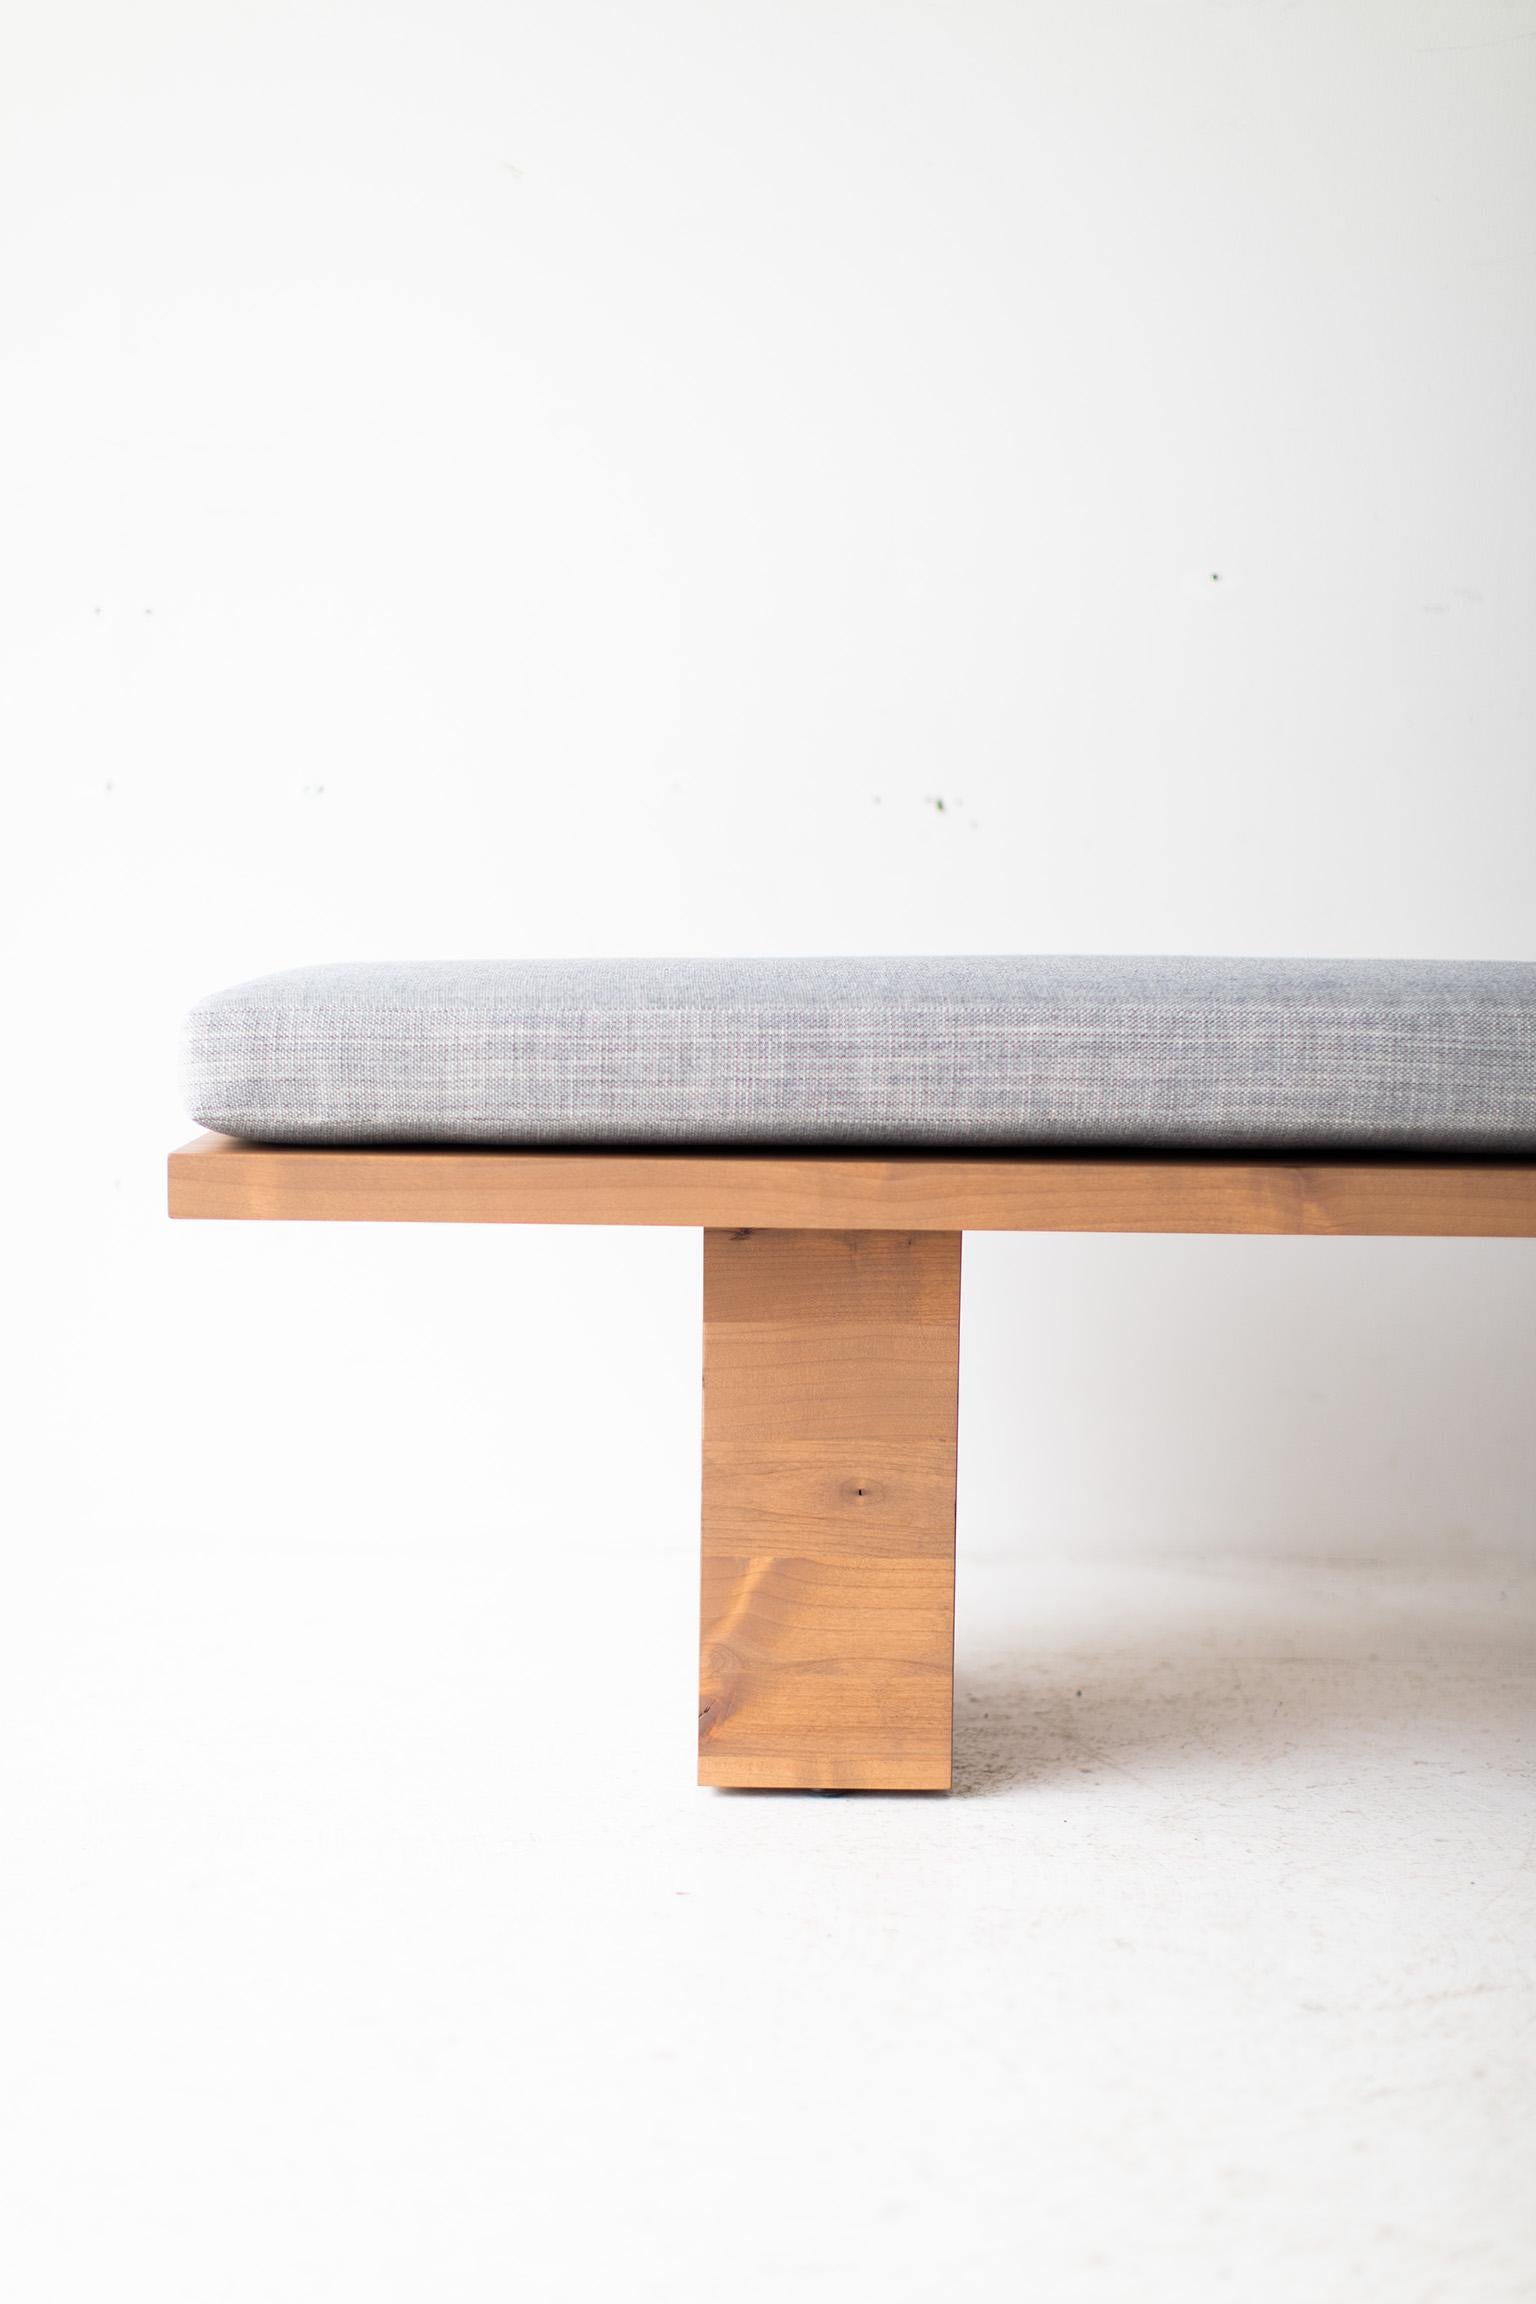 Bertu bench, suelo bench, wood and thick weave fabric, Modern

This Suelo Modern bench is beautifully constructed from solid wood in Ohio, USA. This silhouette is simple, modern, and sleek, topped with a comfortable cushion. This is the perfect